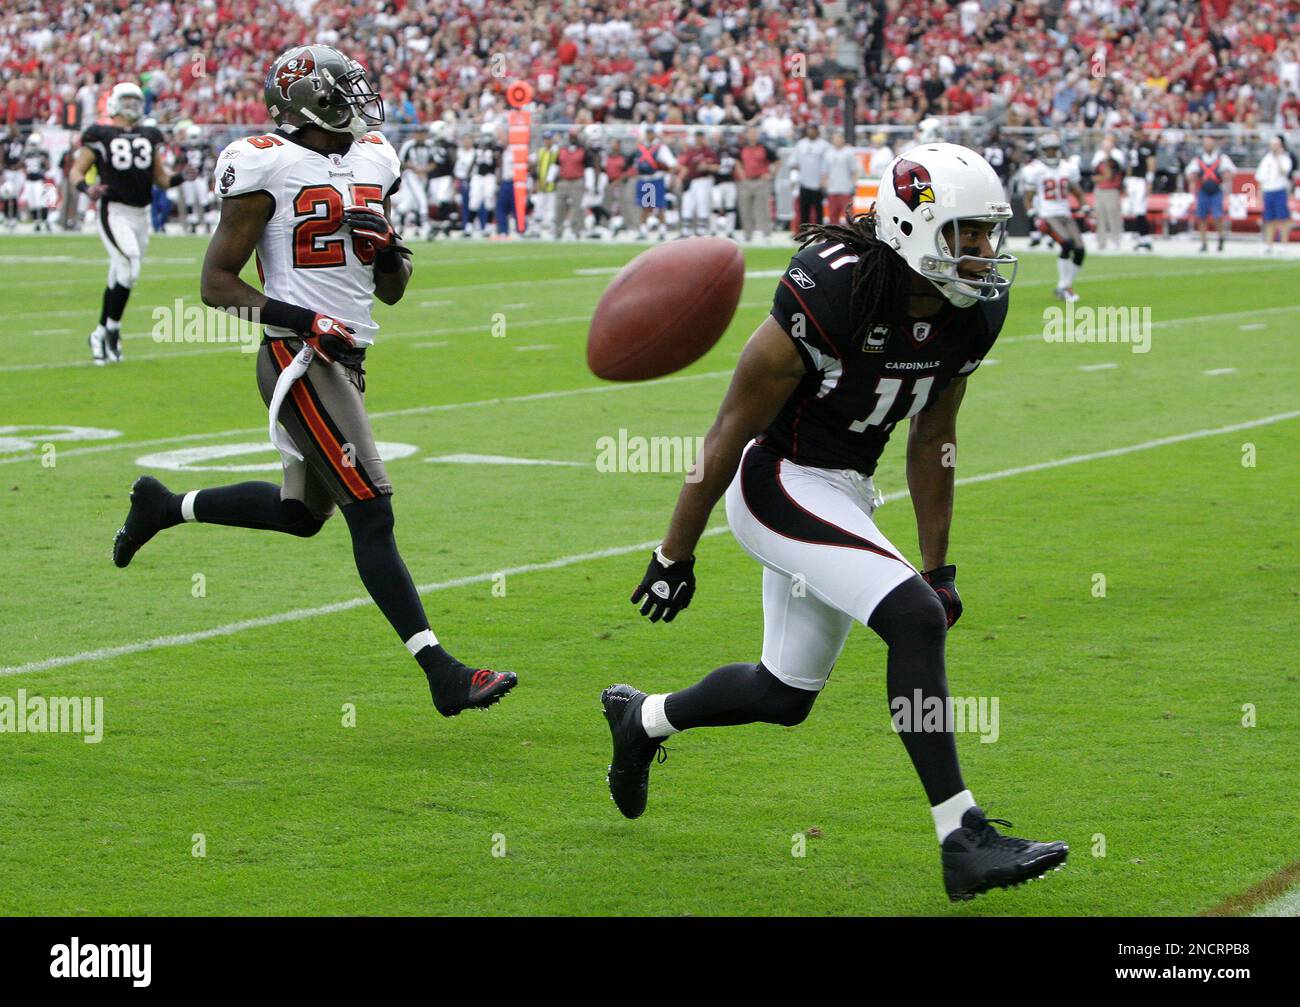 Arizona Cardinals' Larry Fitzgerald (11) is unable to catch the ball thrown  to him as Tampa Bay Buccaneers' Aqib Talib (25) comes in to defend during  an NFL football game Sunday, Oct.